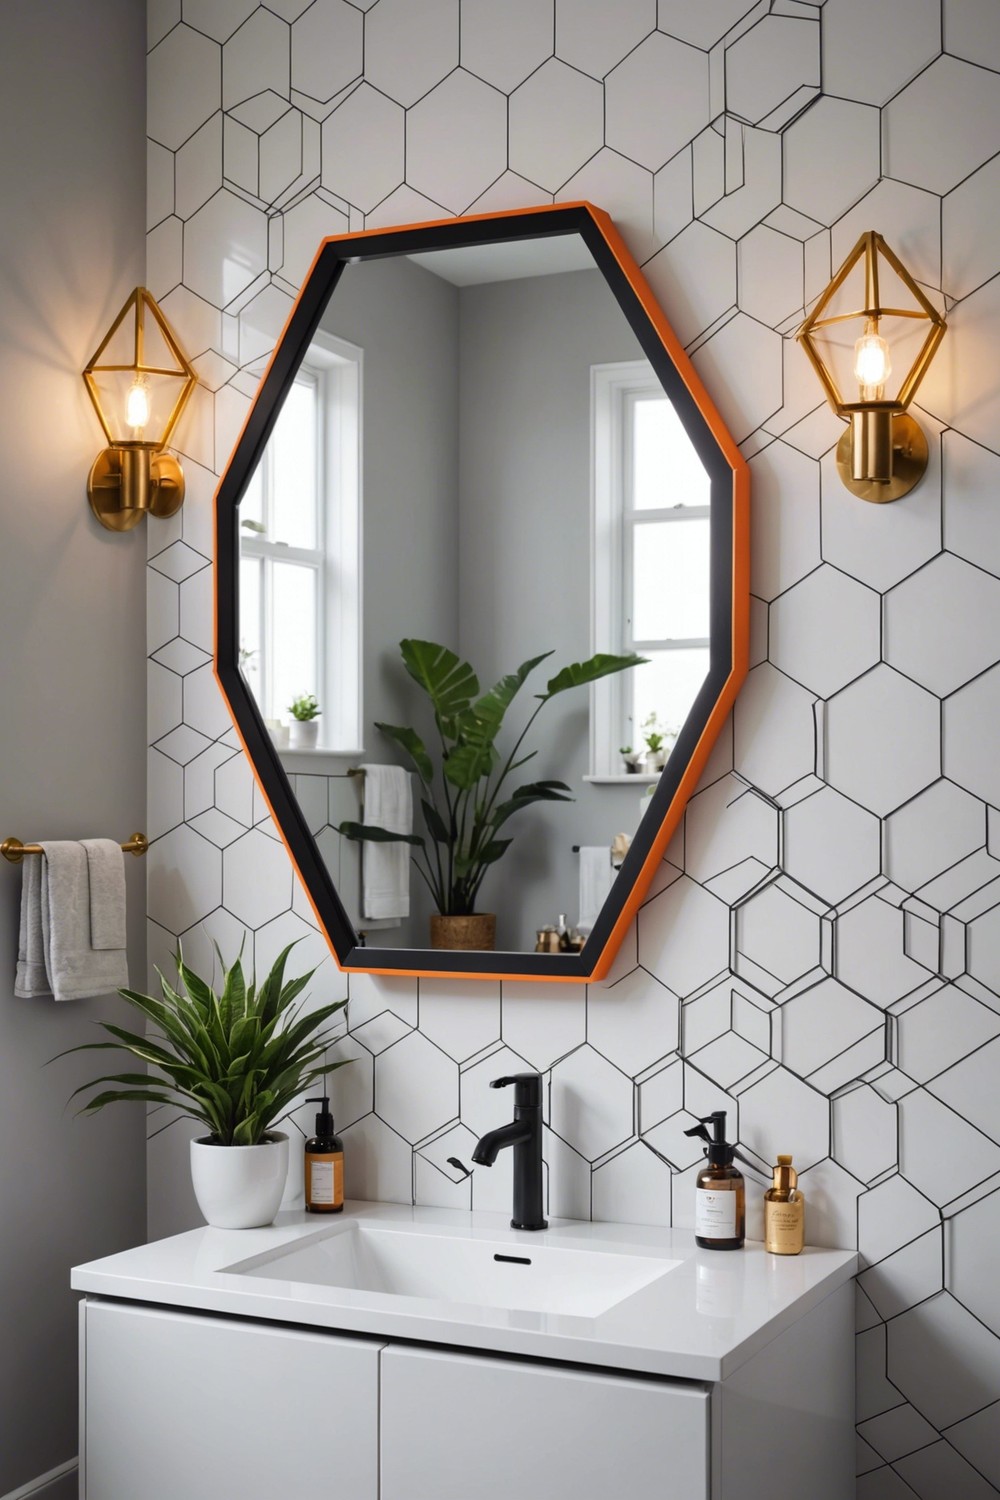 Geometric Shaped Mirrors for a Funky Look